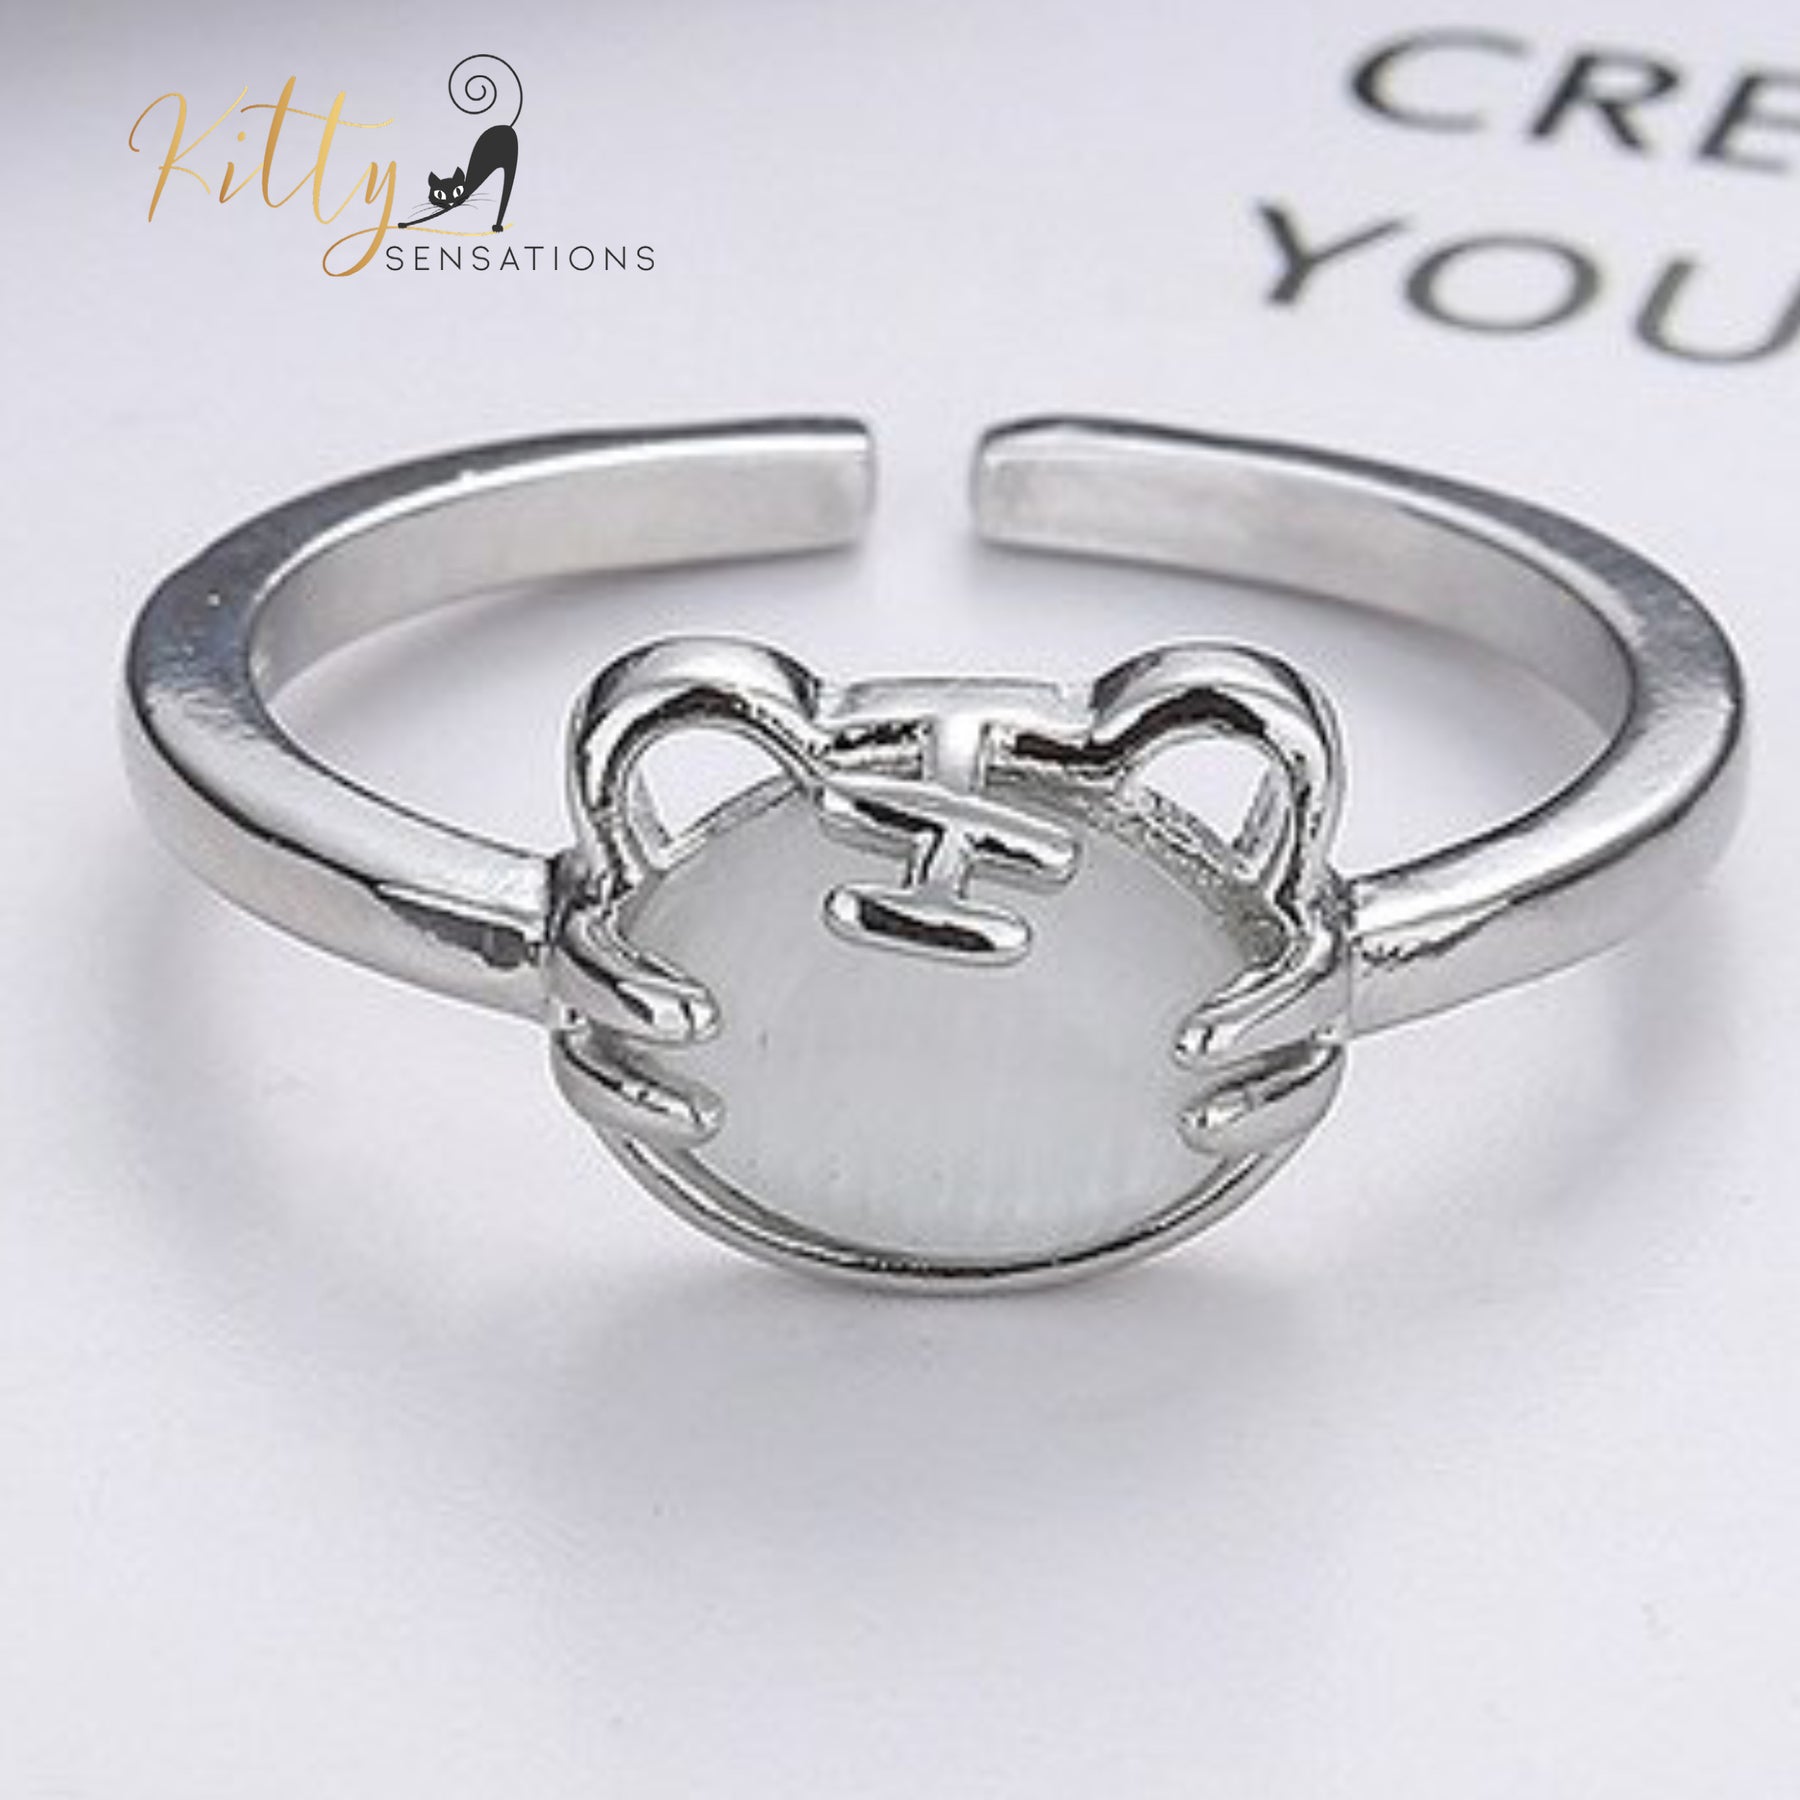 Natural Clear Quartz Cat Ring in Solid 925 Sterling Silver - Adjustable